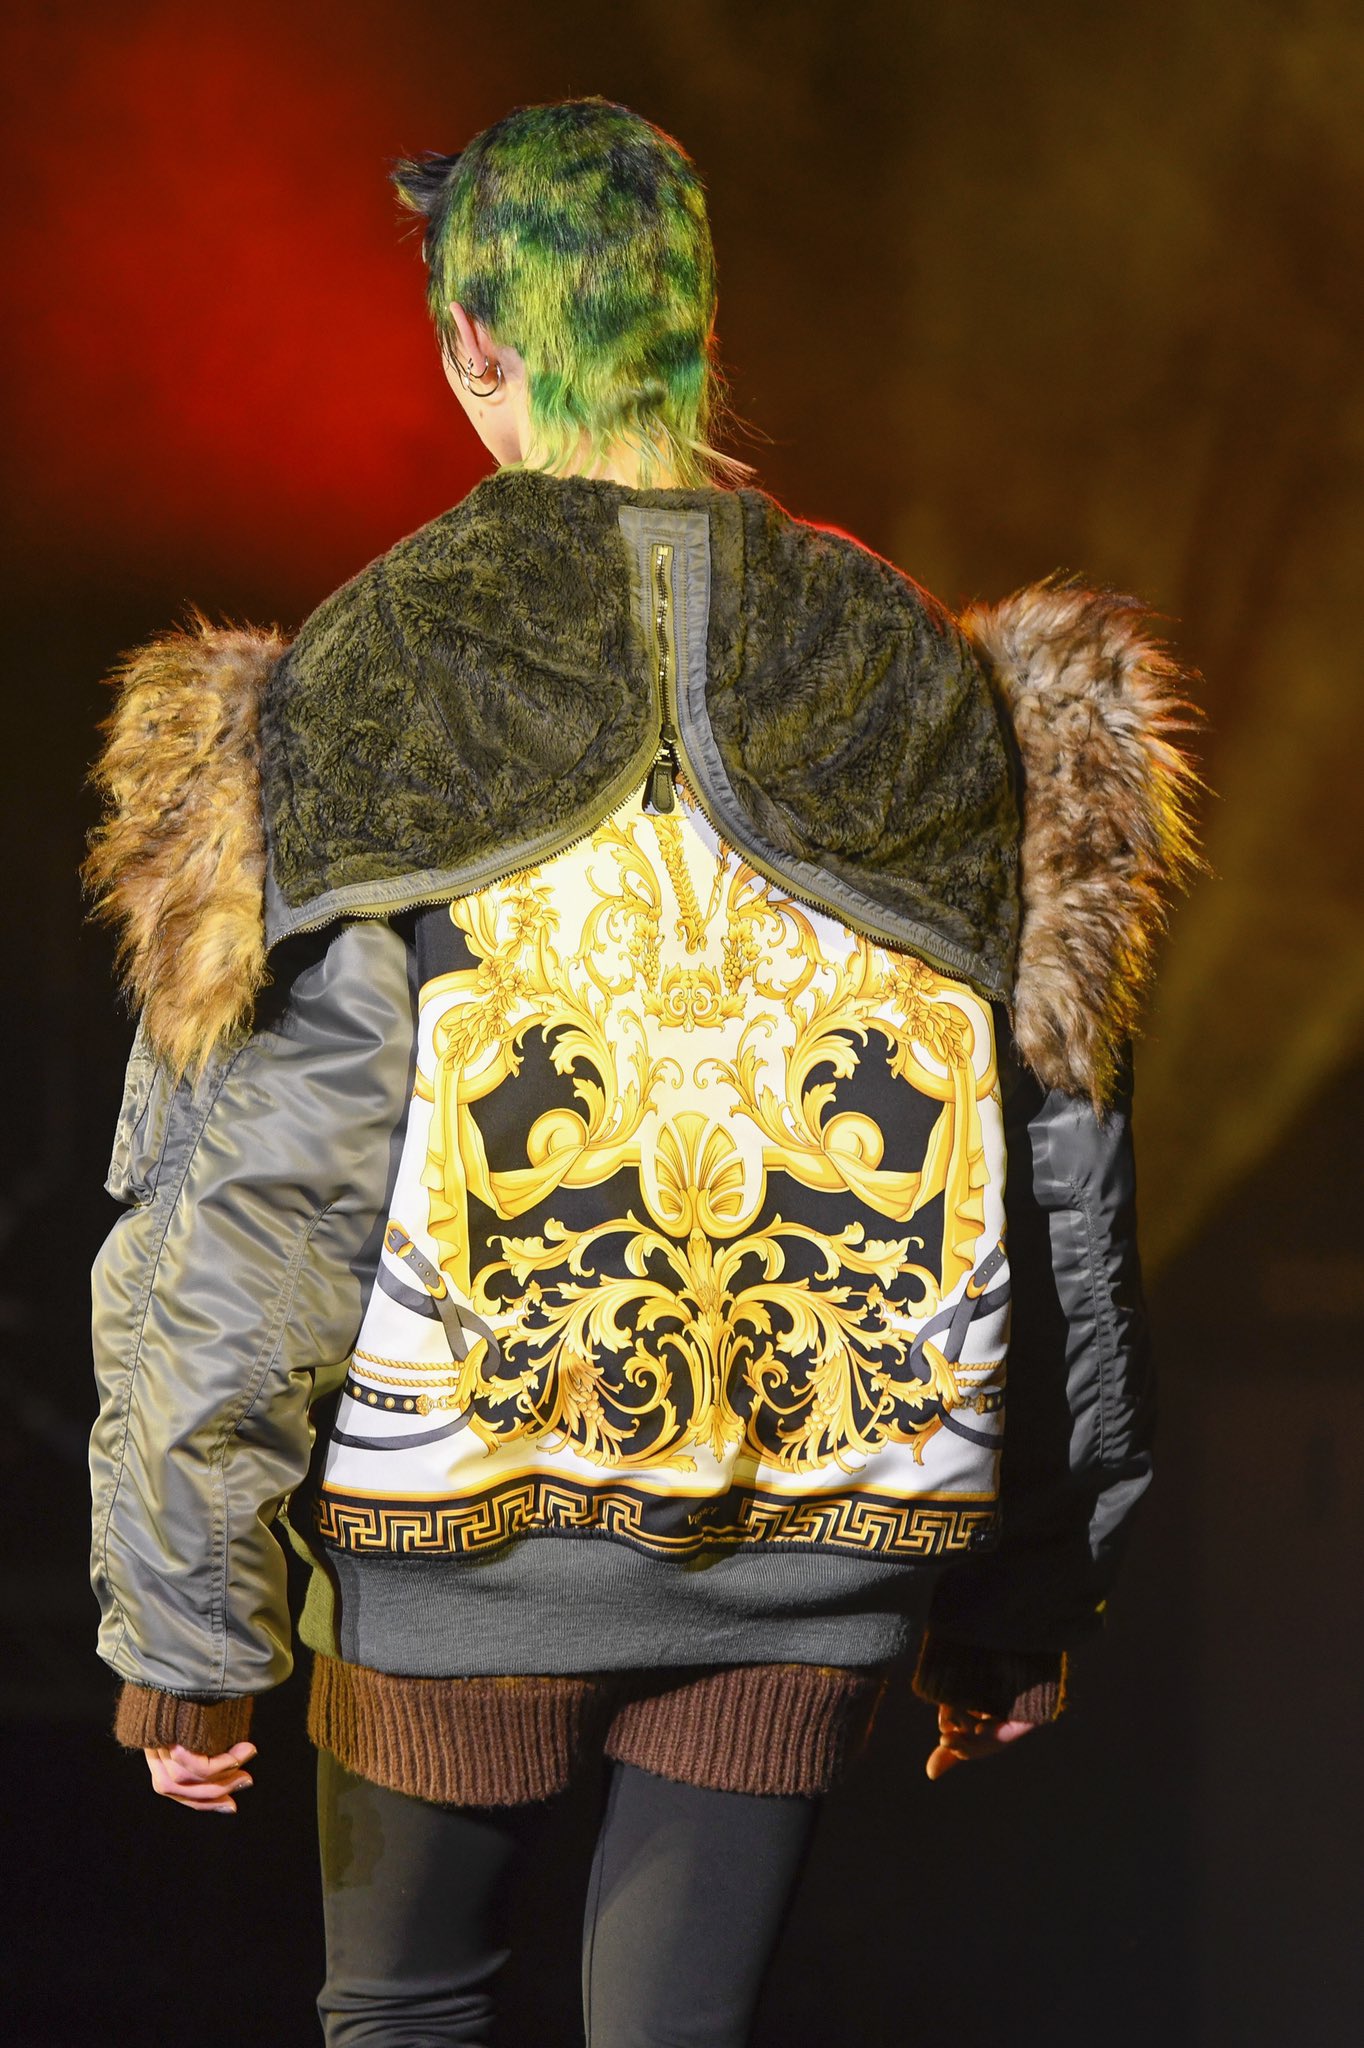 VERSACE on X: The Junya Watanabe Comme des Garçons x Versace Iconic Print  Project reinterprets iconic Versace prints on the FW21 runway and will  launch officially this fall. #JWxVersace  / X